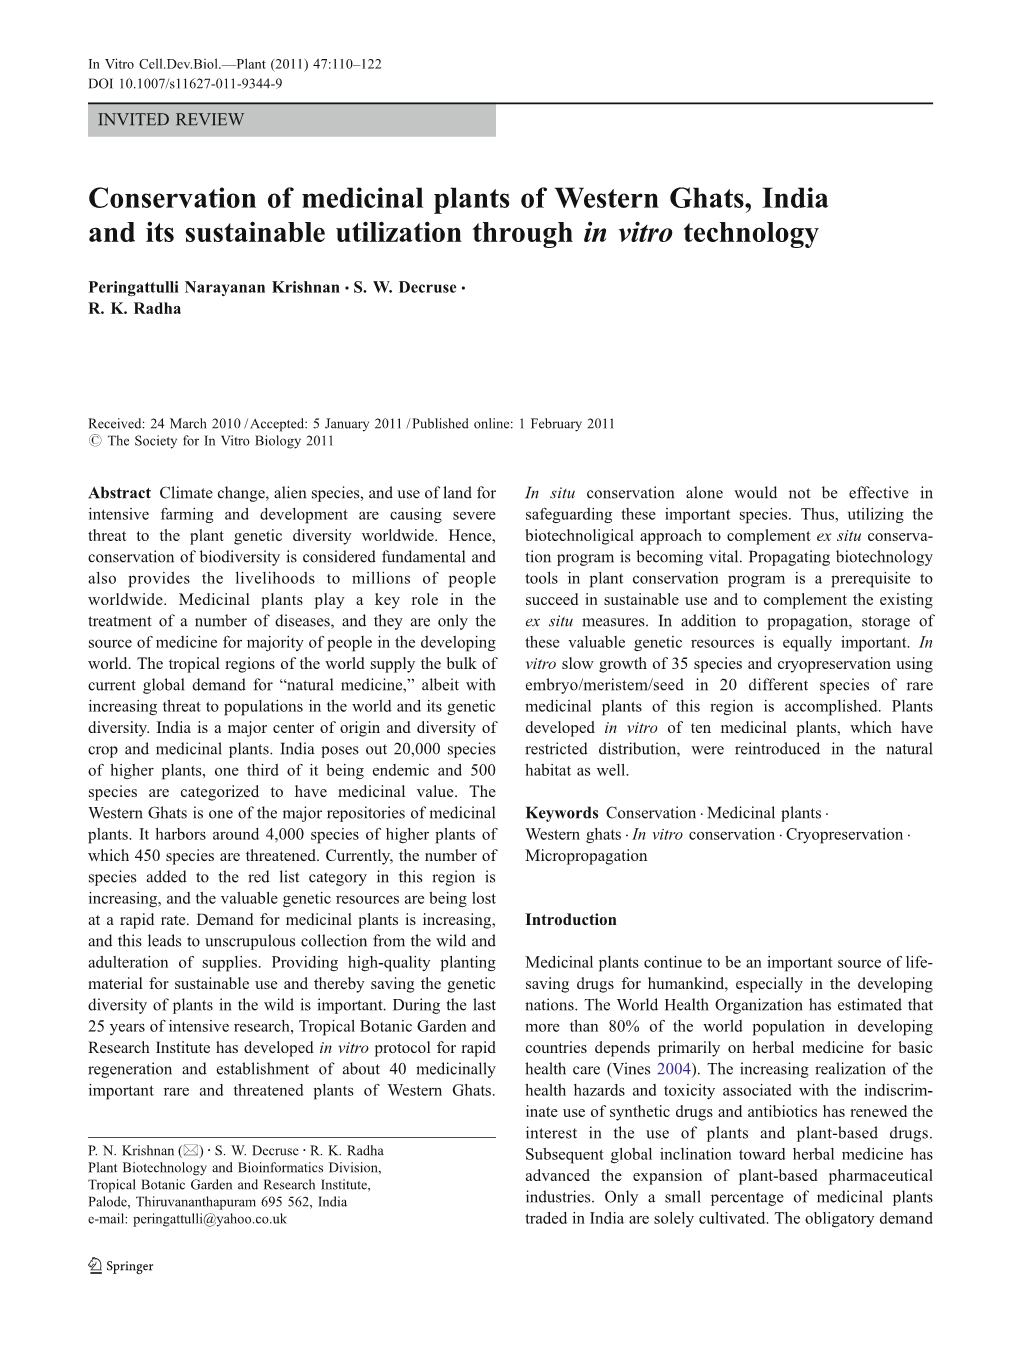 Conservation of Medicinal Plants of Western Ghats, India and Its Sustainable Utilization Through in Vitro Technology